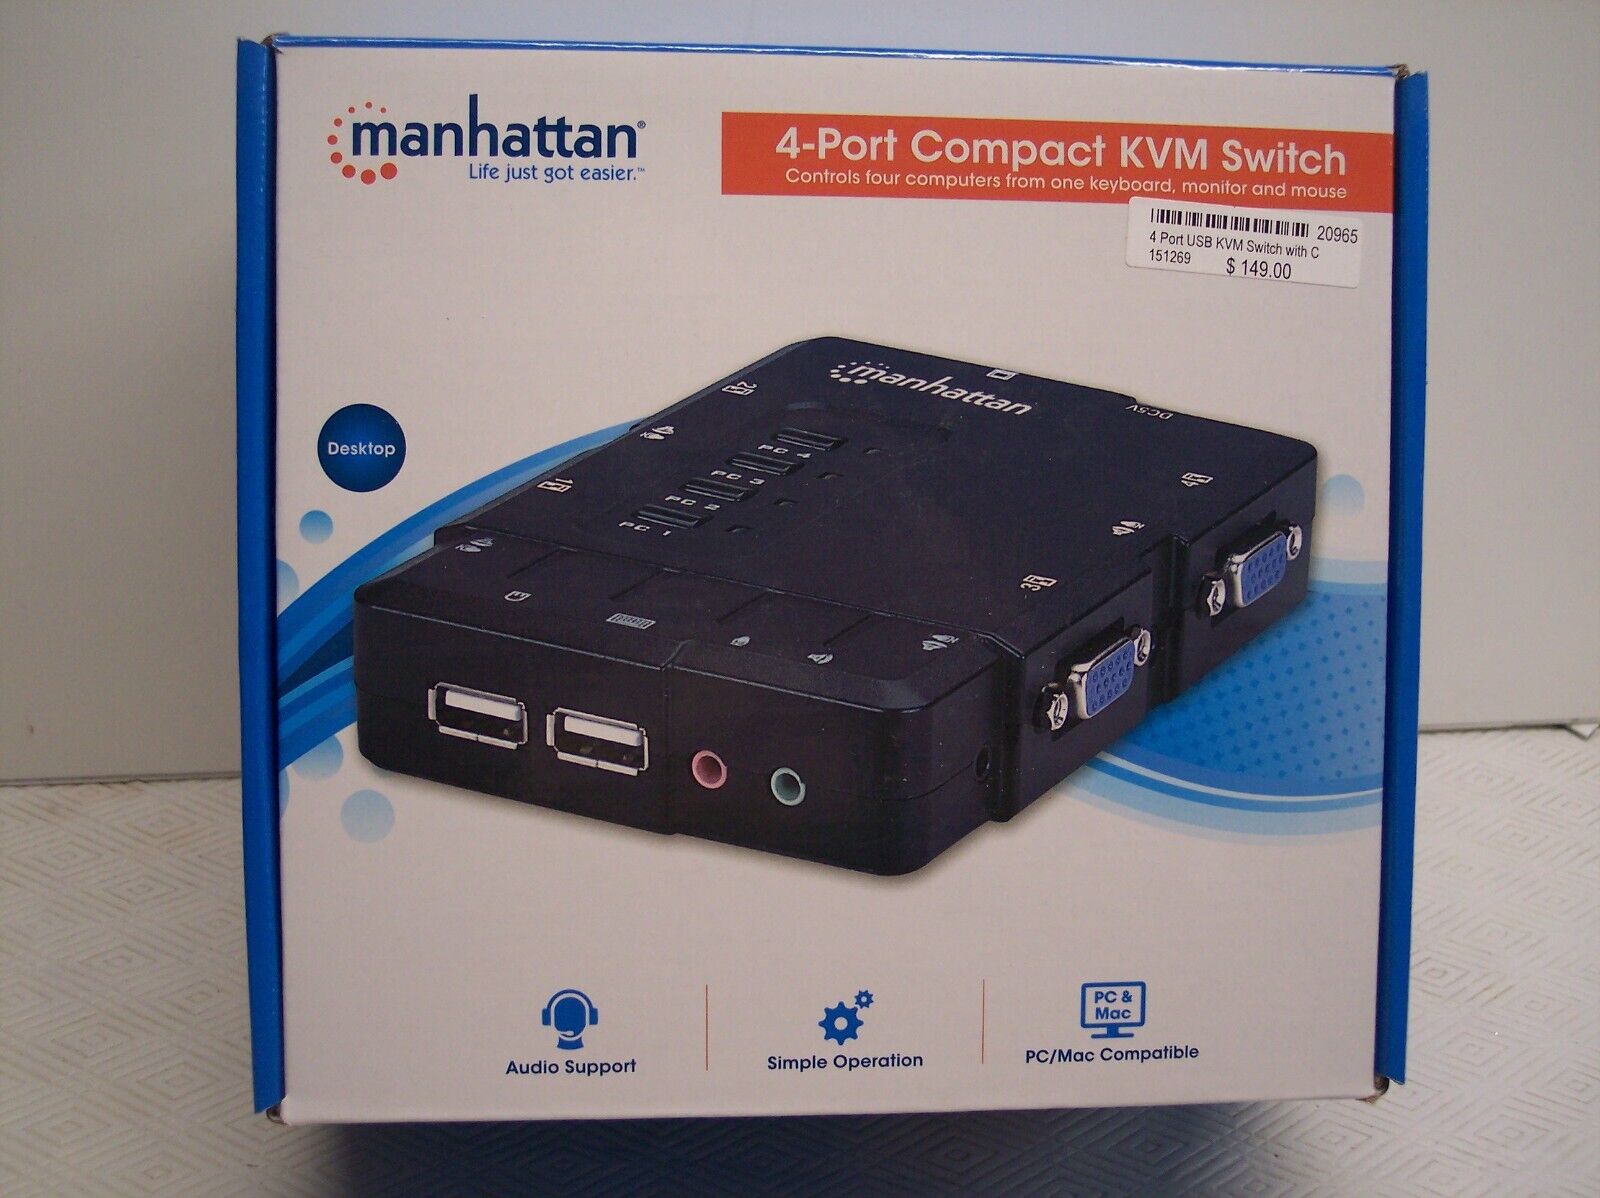  4-Port Compact KVM Switch with Remote Port Selector Manhattan #151269